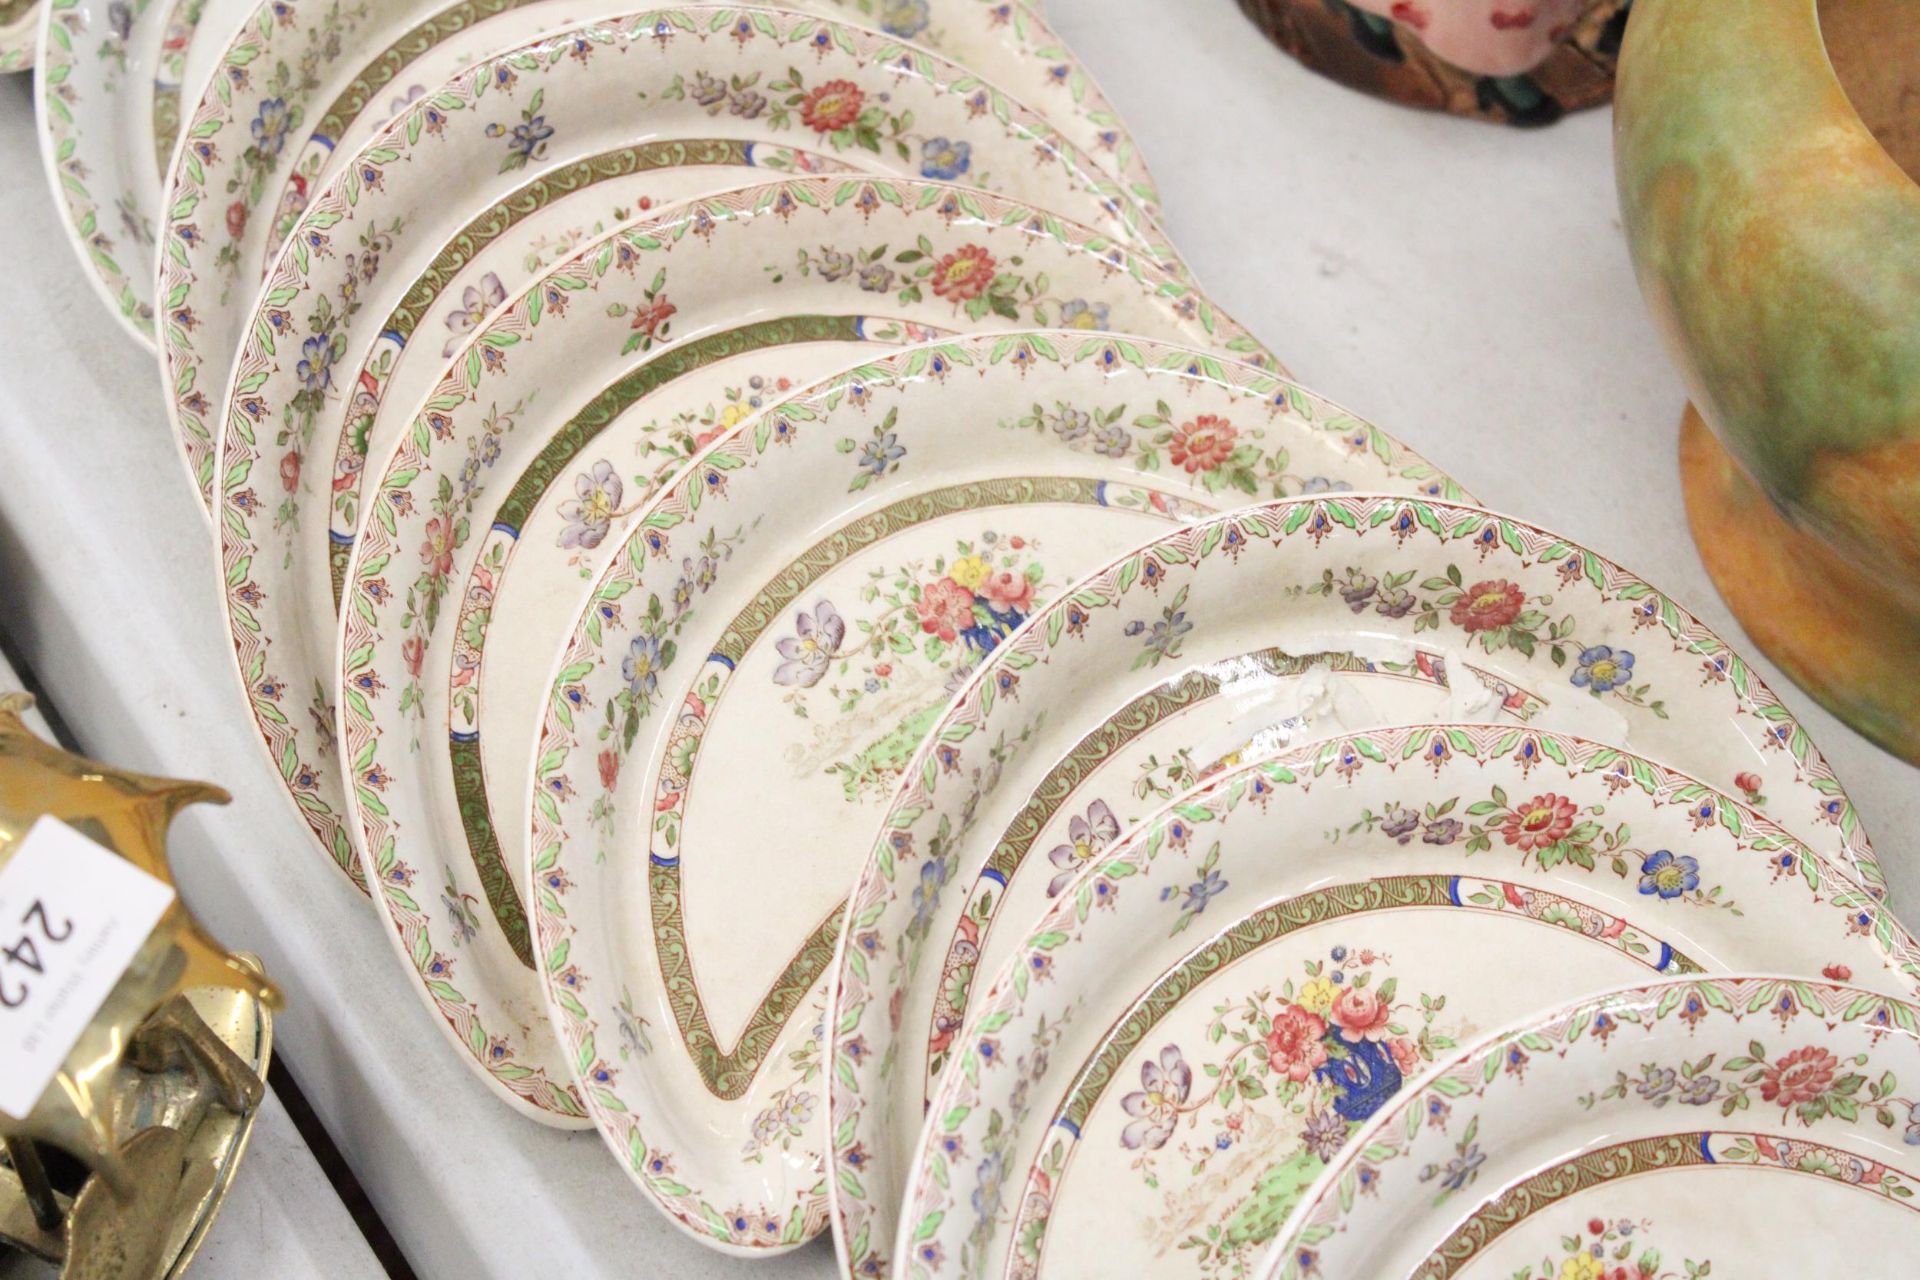 ELEVEN SPODE "COPELAND LATE - LYON" CRESCENT SHAPED PLATES - Image 4 of 5